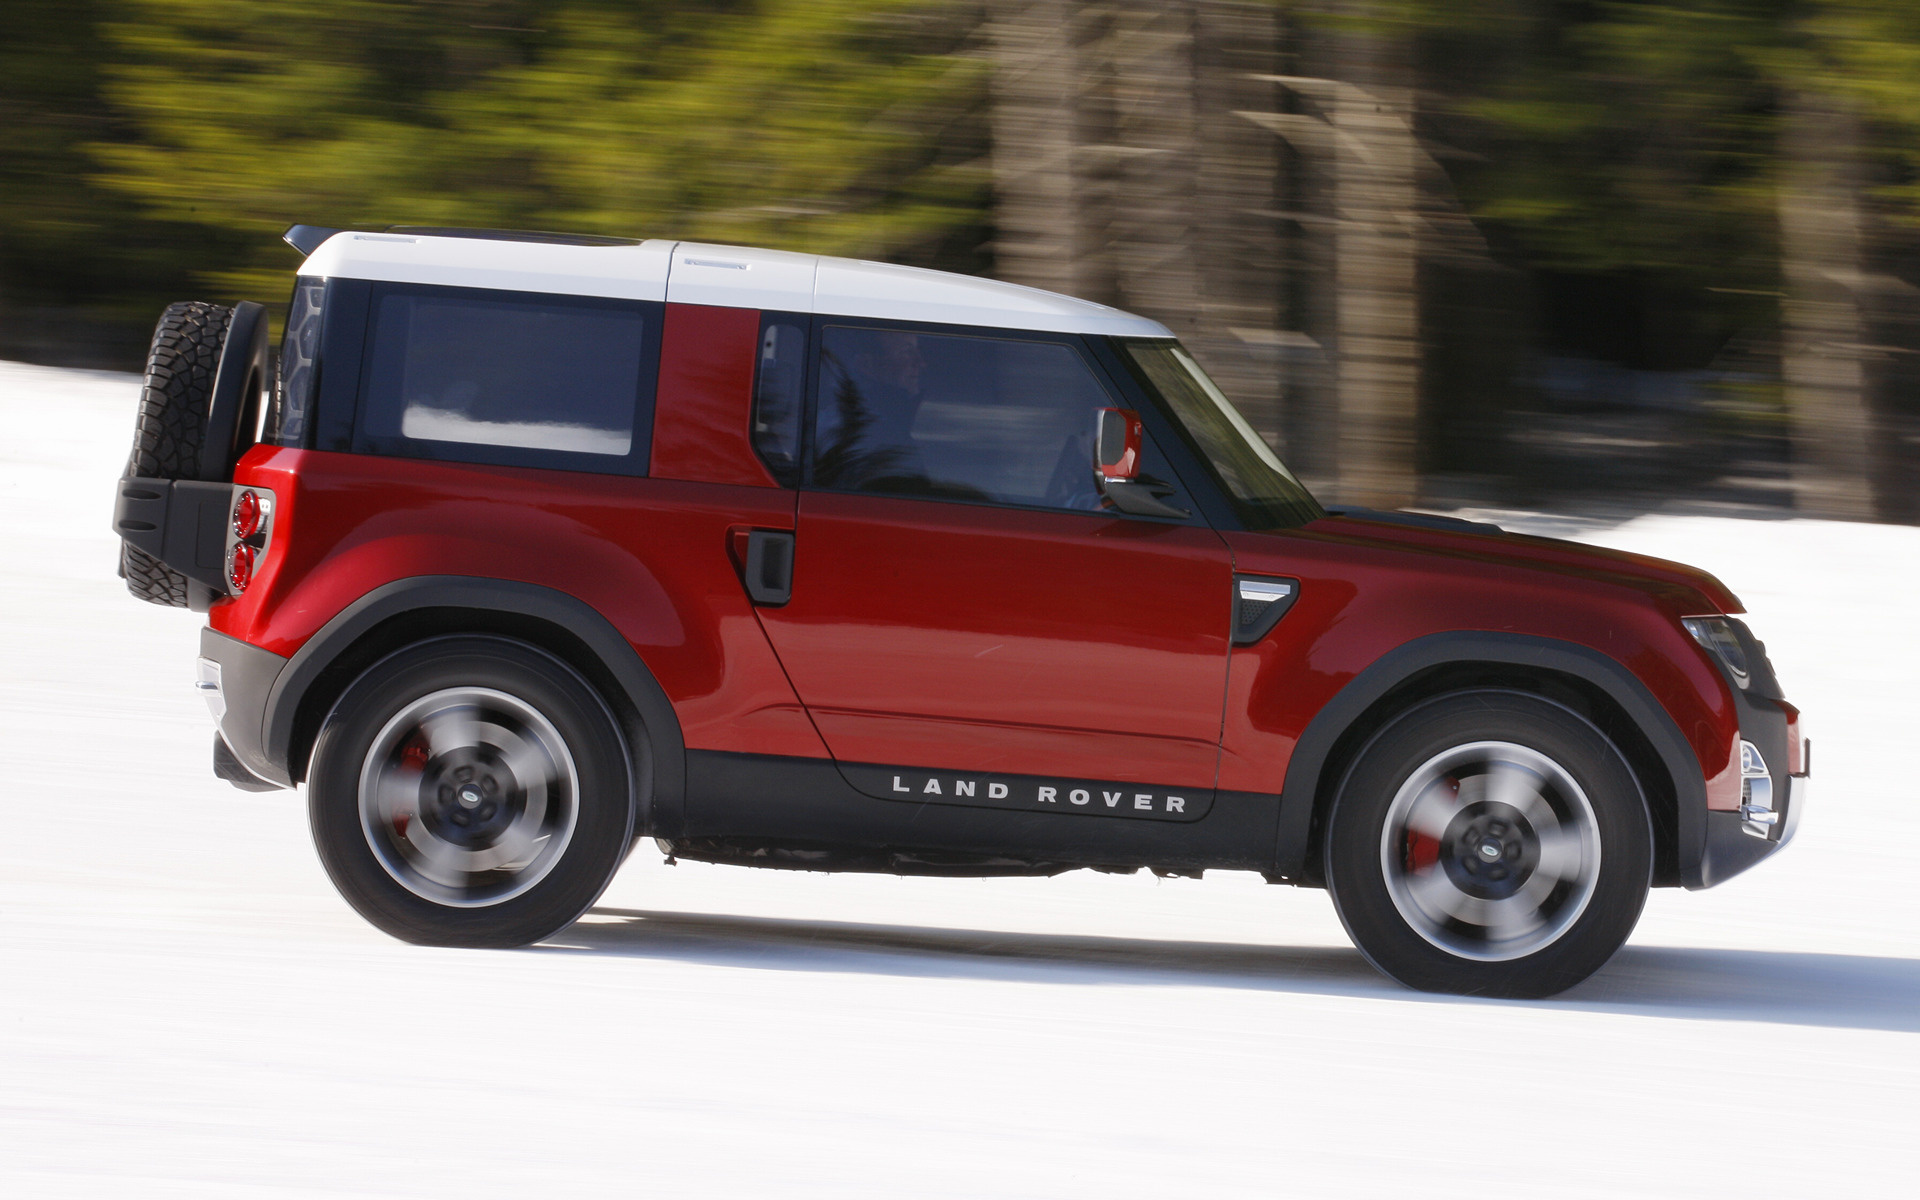 2011 Land Rover Dc100 Sport Concept Wallpapers